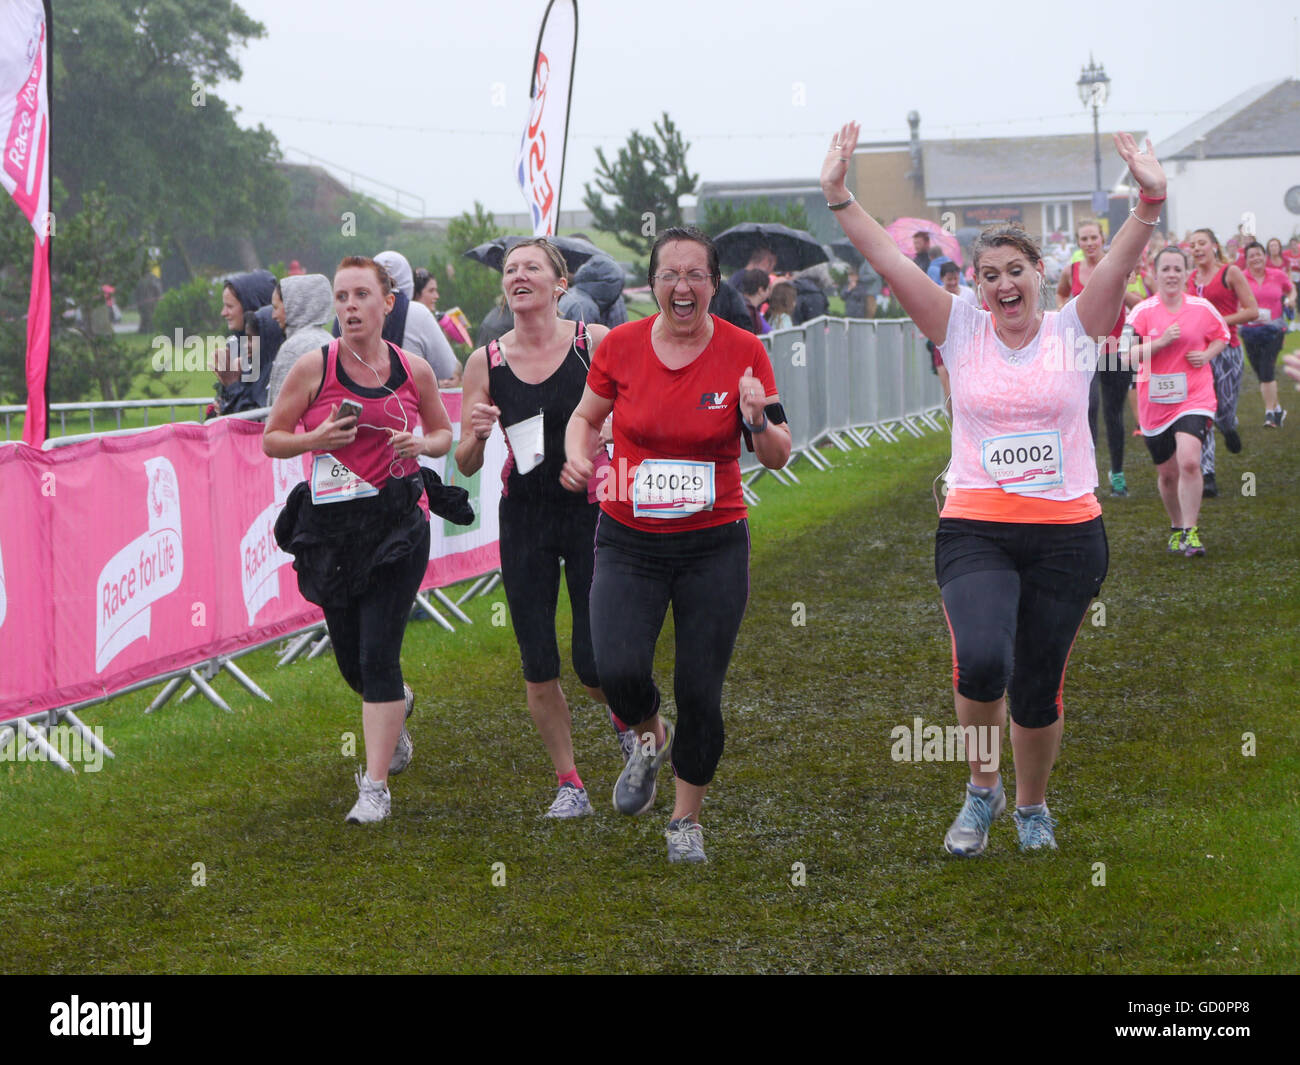 Portsmouth, Hampshire, UK. 10 July 2016. Two friends celebrate as they cross the finish line of the Race for life. The Race for life is a charity event in which females complete a 10Km or 5Km run in aid of cancer reseach. Credit:  simon evans/Alamy Live News Stock Photo